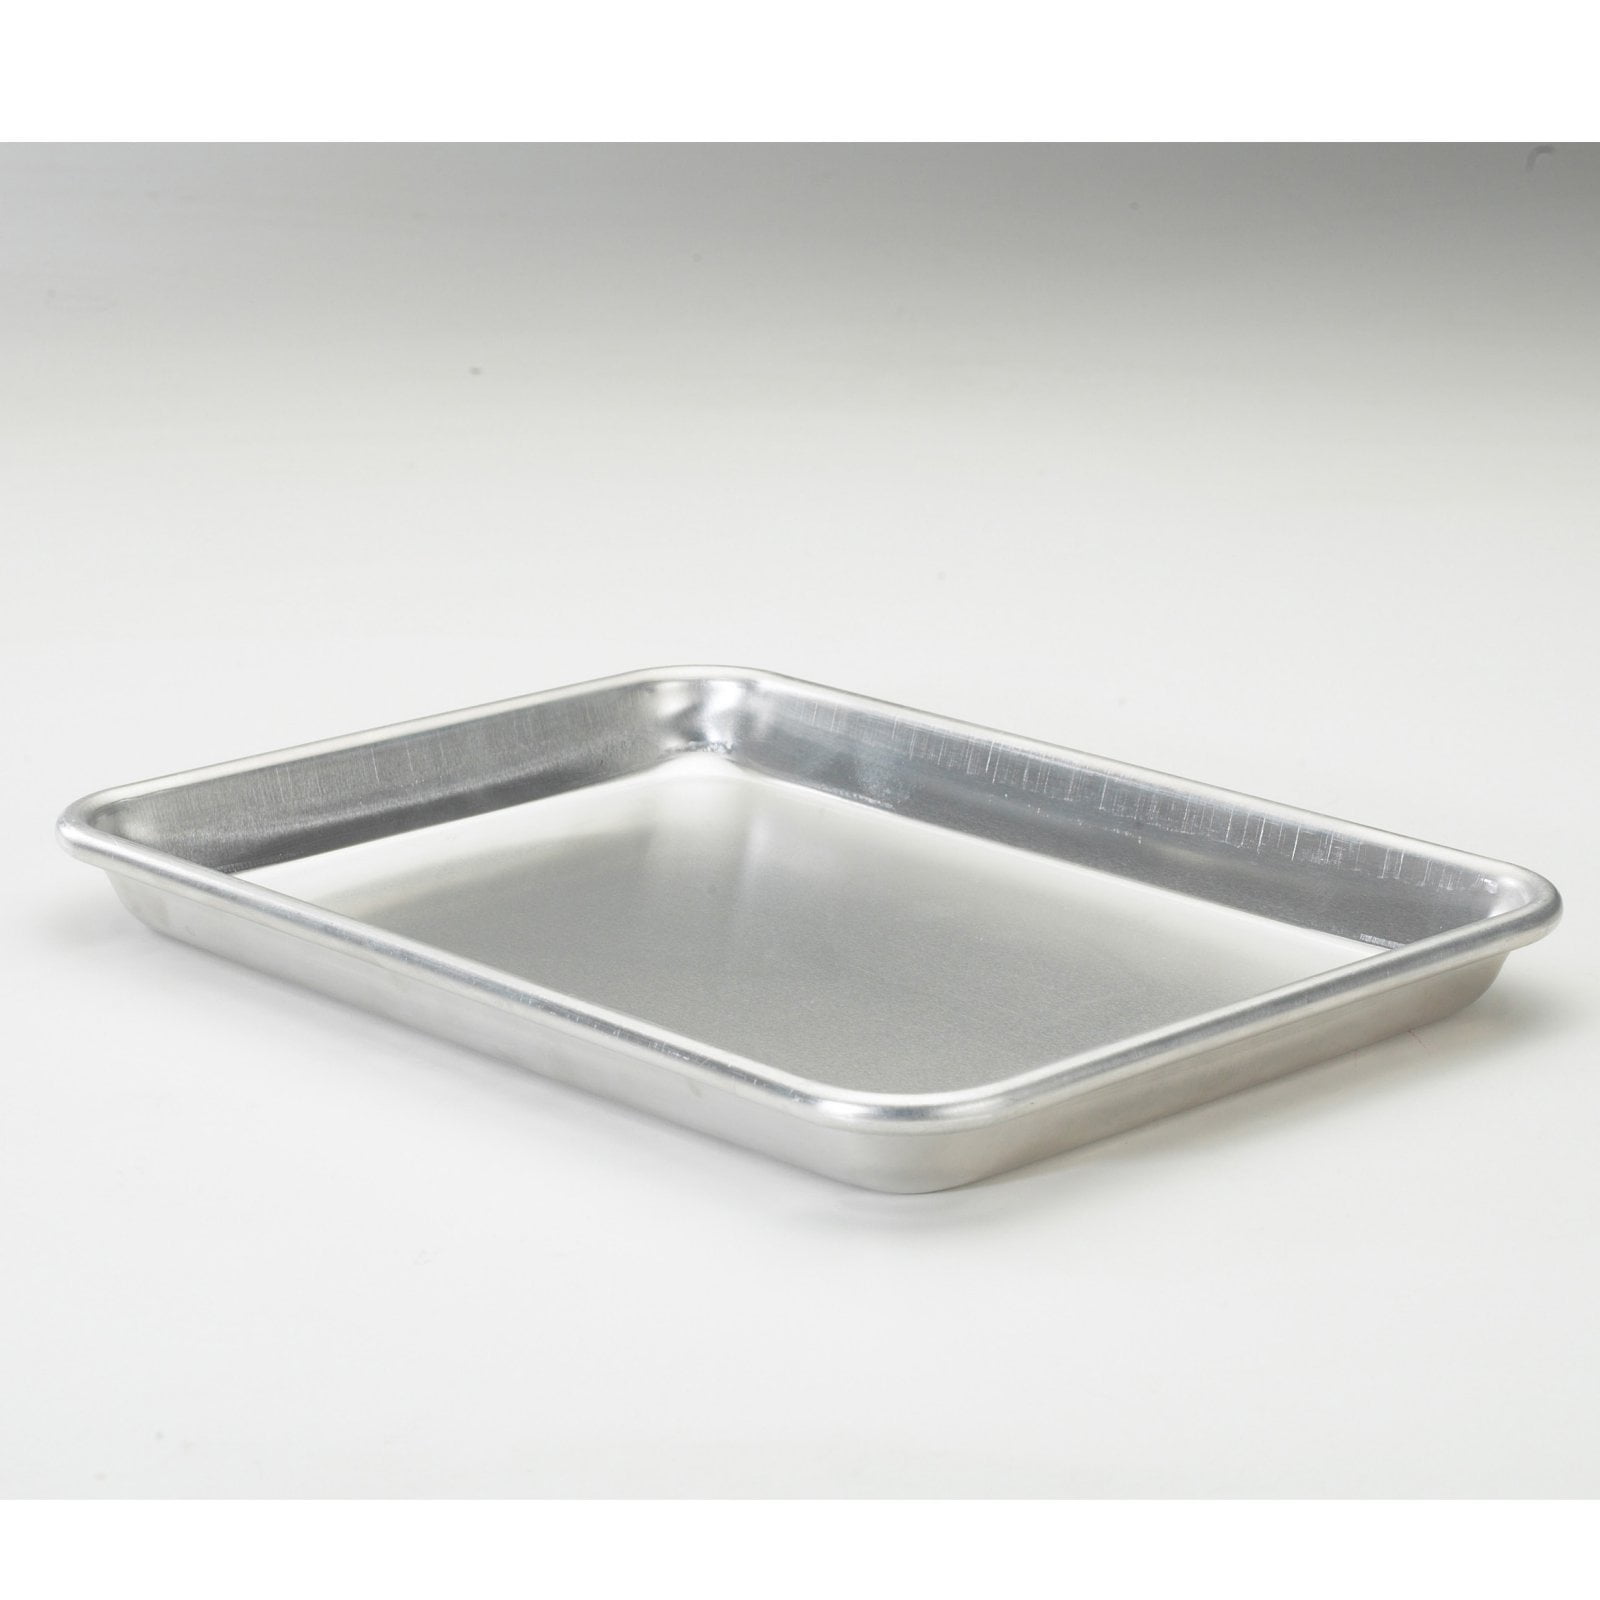 1/4 Sheet Pan, Aluminum 9 X 13 Inches — Kitchen Supply Wholesale